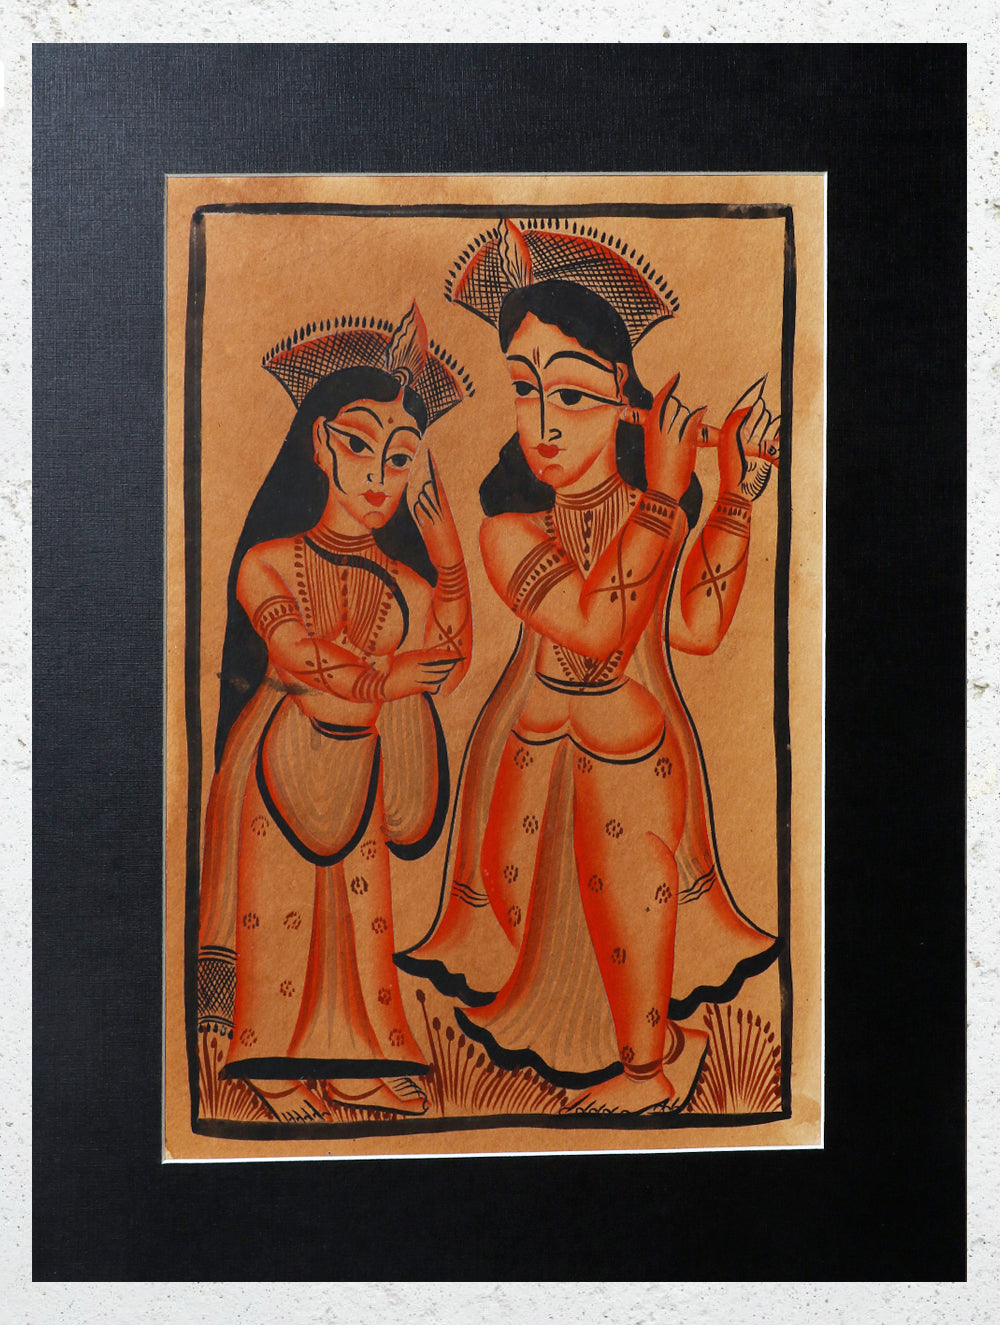 Krishna and Radha flying kites. Gouache painting by an Indian artist. |  Wellcome Collection